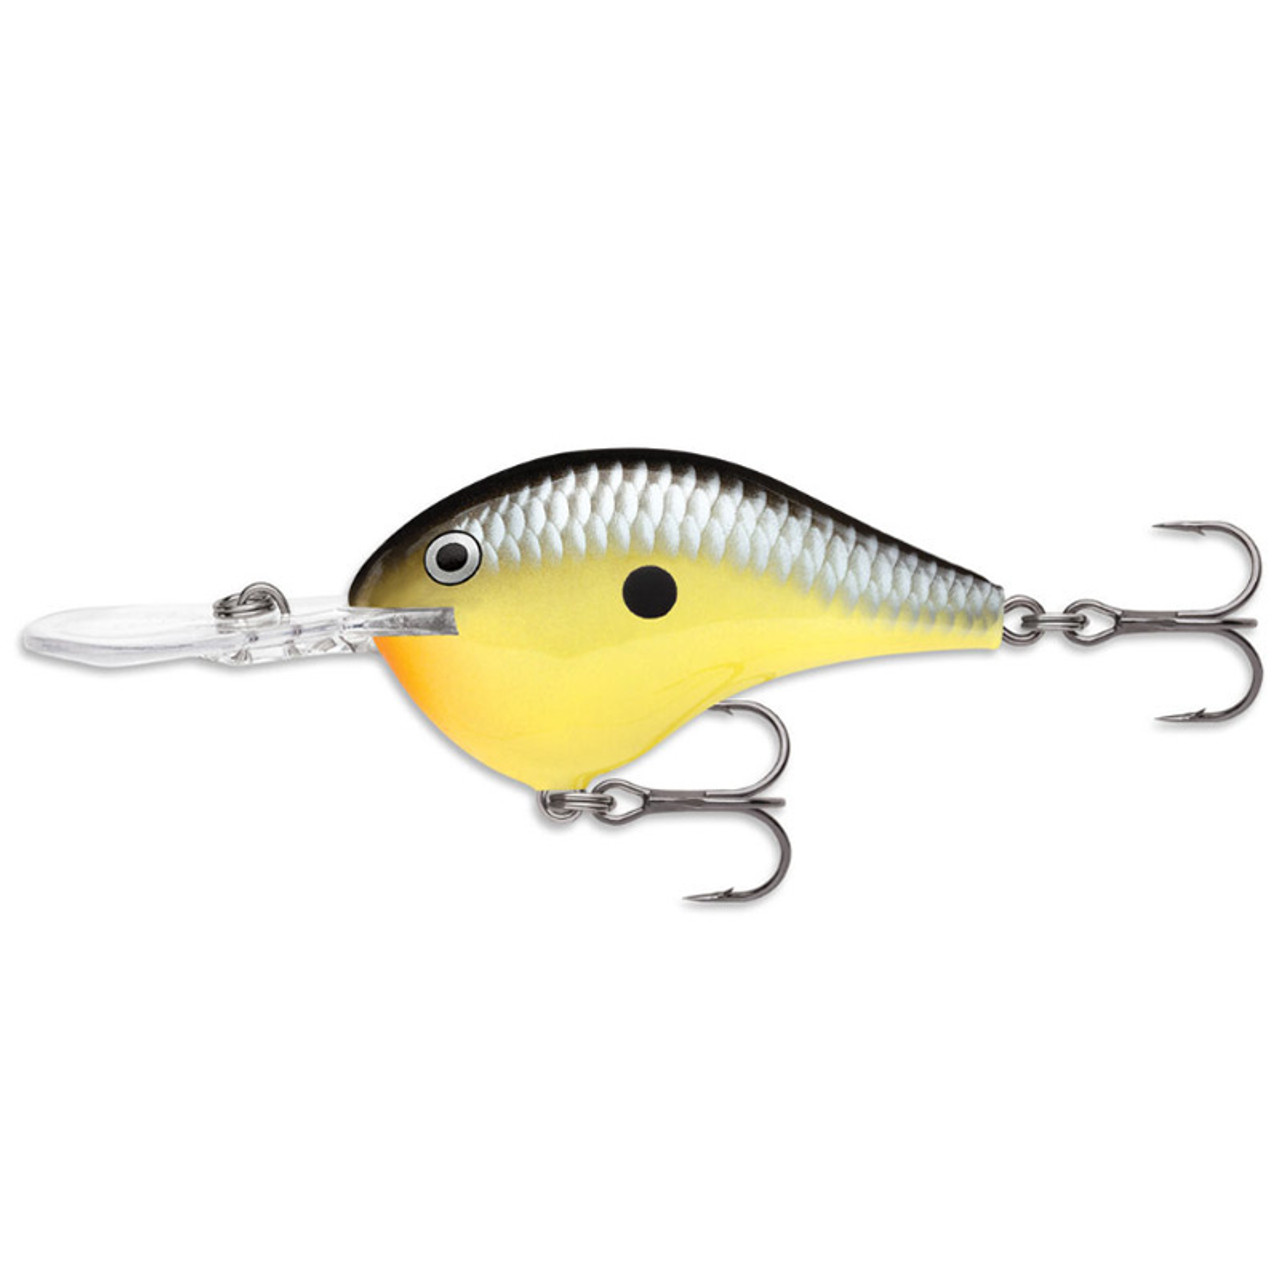 Dives-To DT10 2-1/4" Crankbaits by Rapala